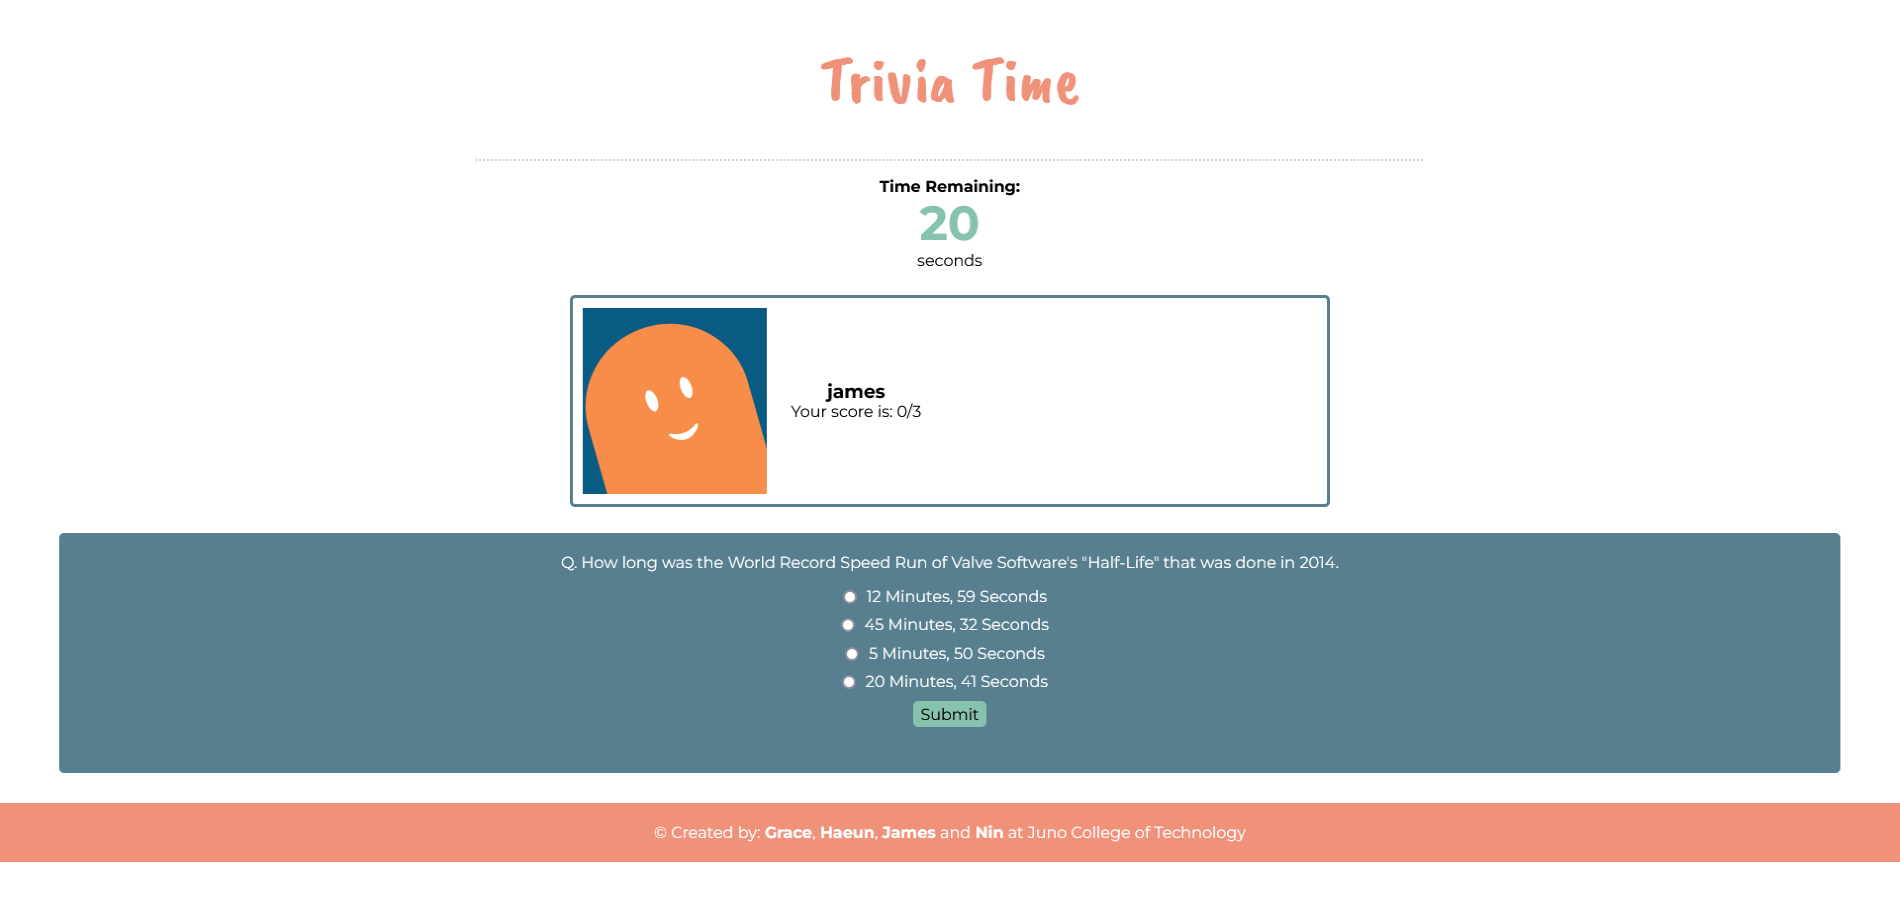 A Screenshot of the Triva Time App